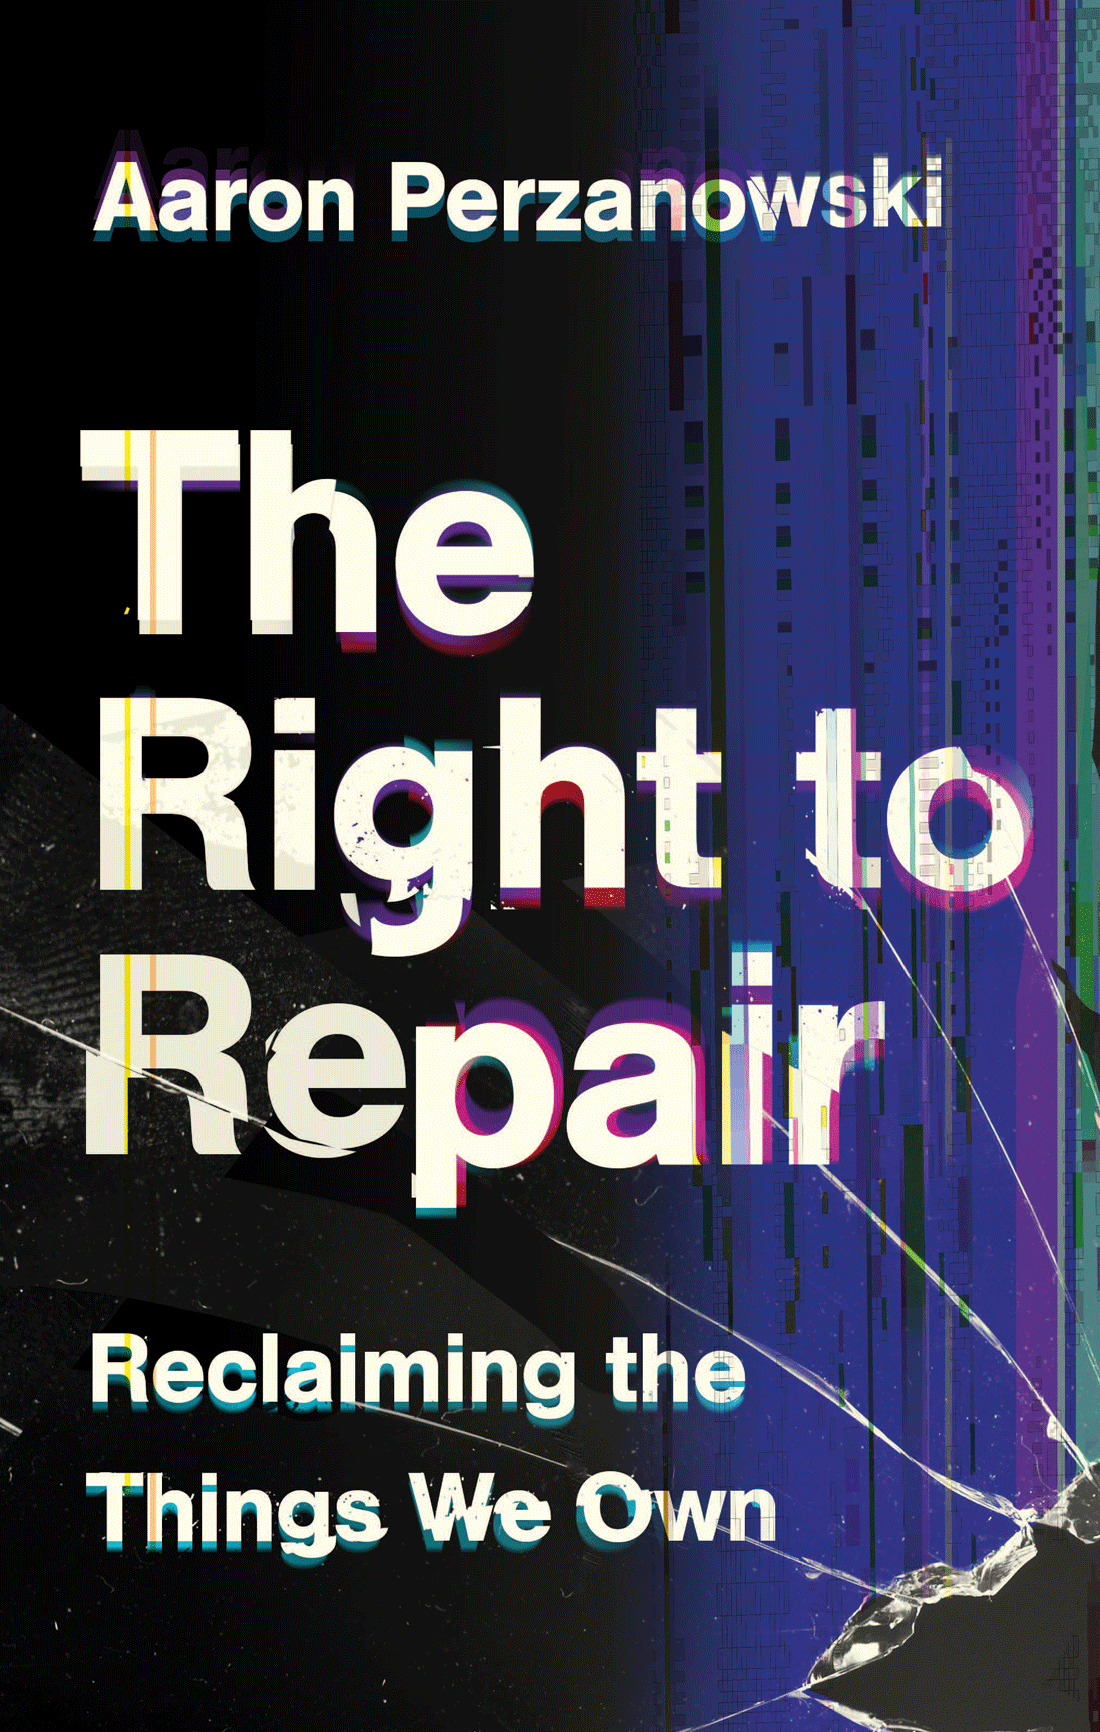 The Right to Repair